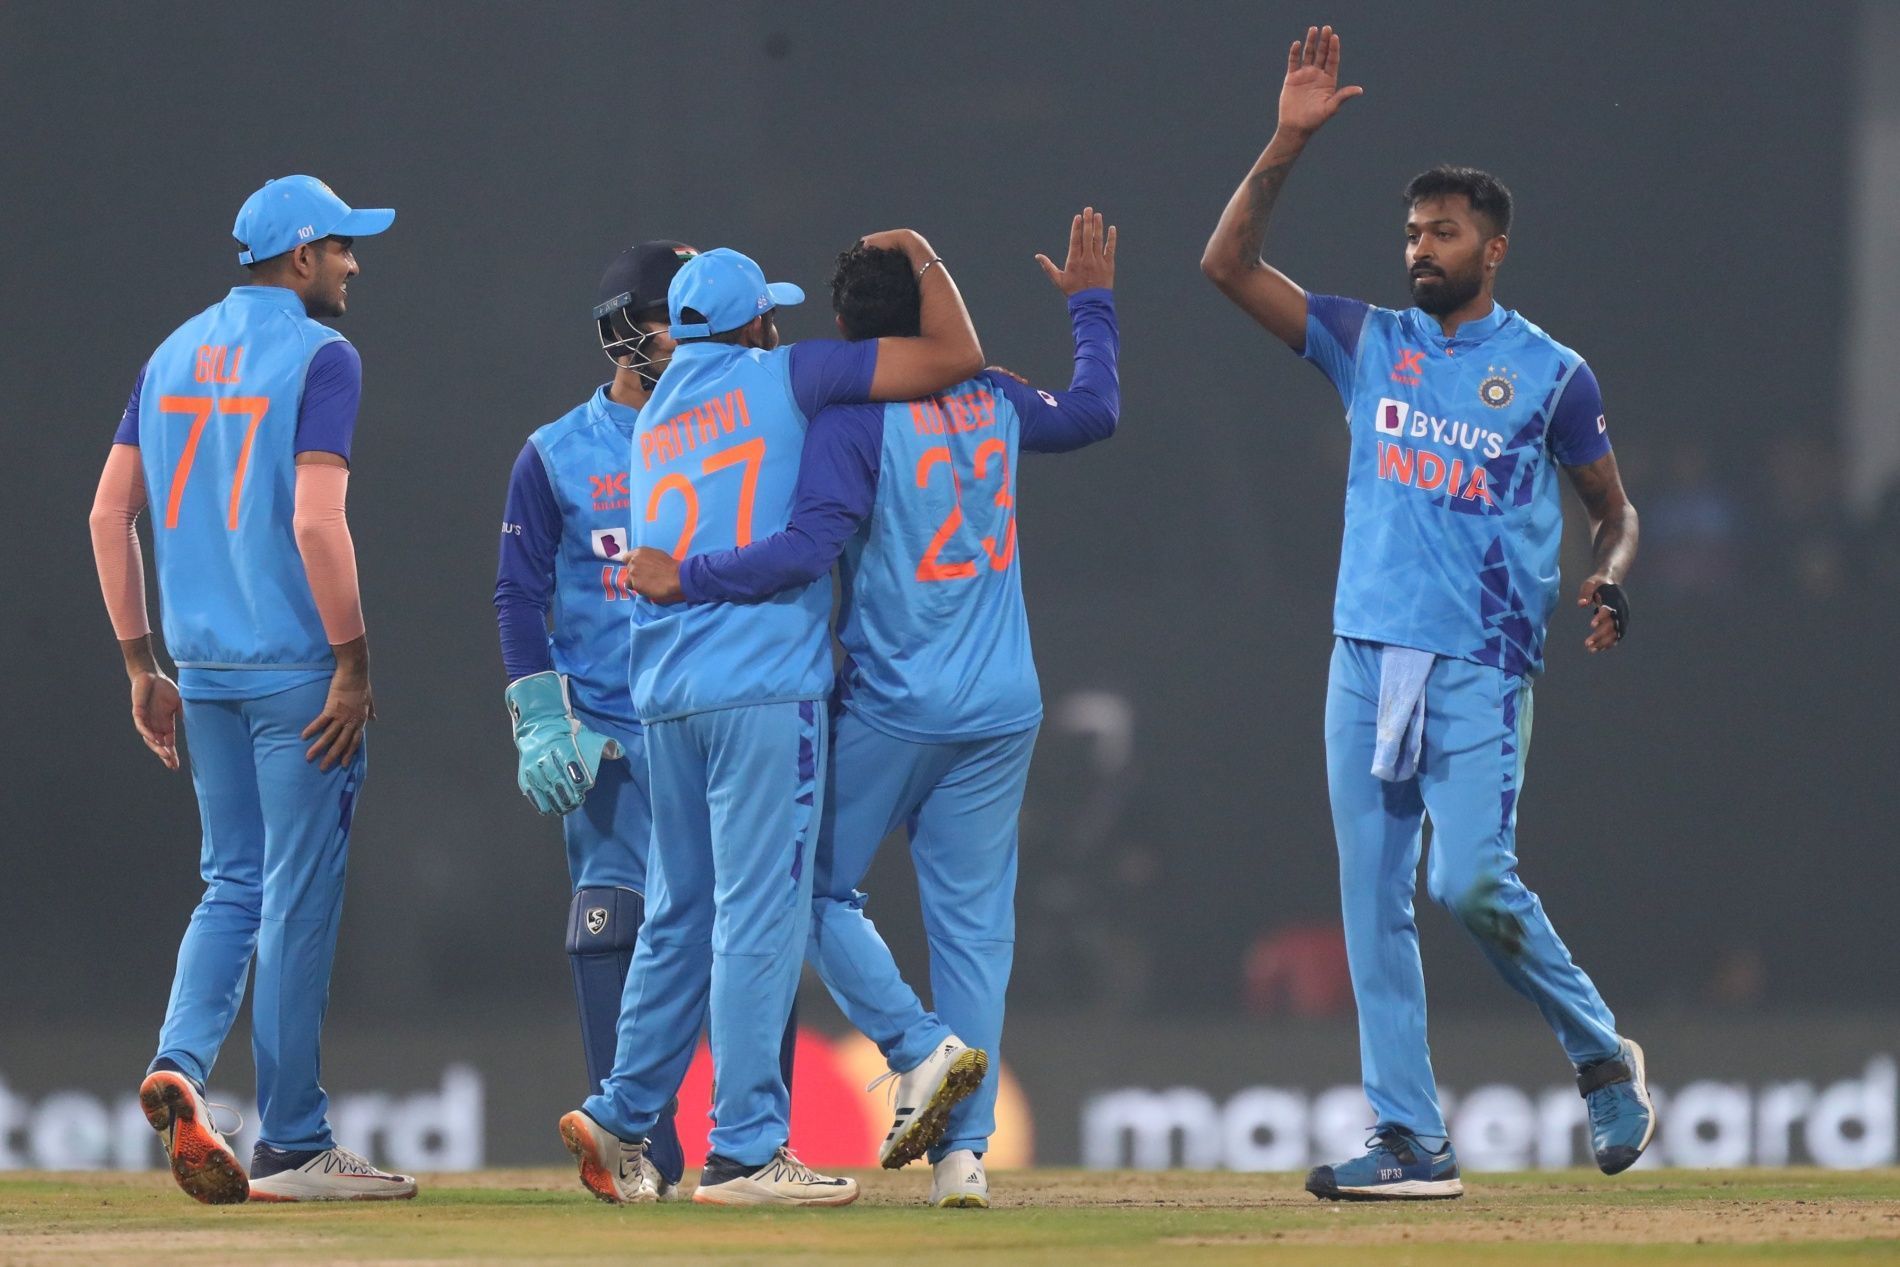 India vs New Zealand, 2nd T20I Lucknow